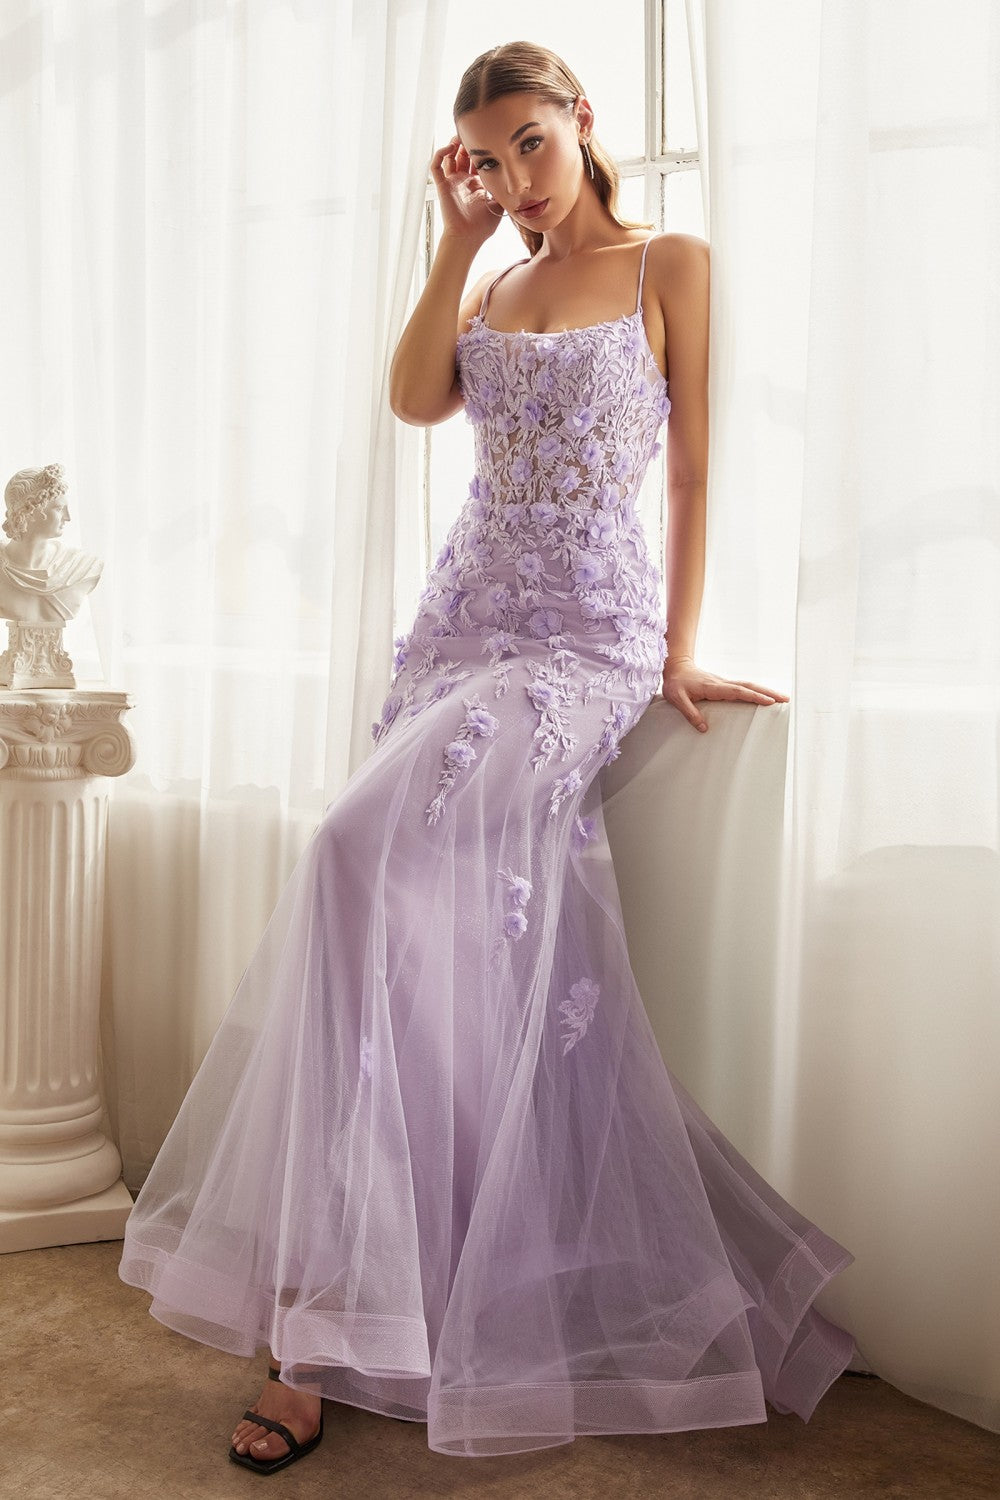 CD CD995 - 3D Floral Embellished Fit & Flare Prom Gown with Sheer Boned Bodice & Lace Up Corset Back PROM GOWN Cinderella Divine 2 LAVENDER 